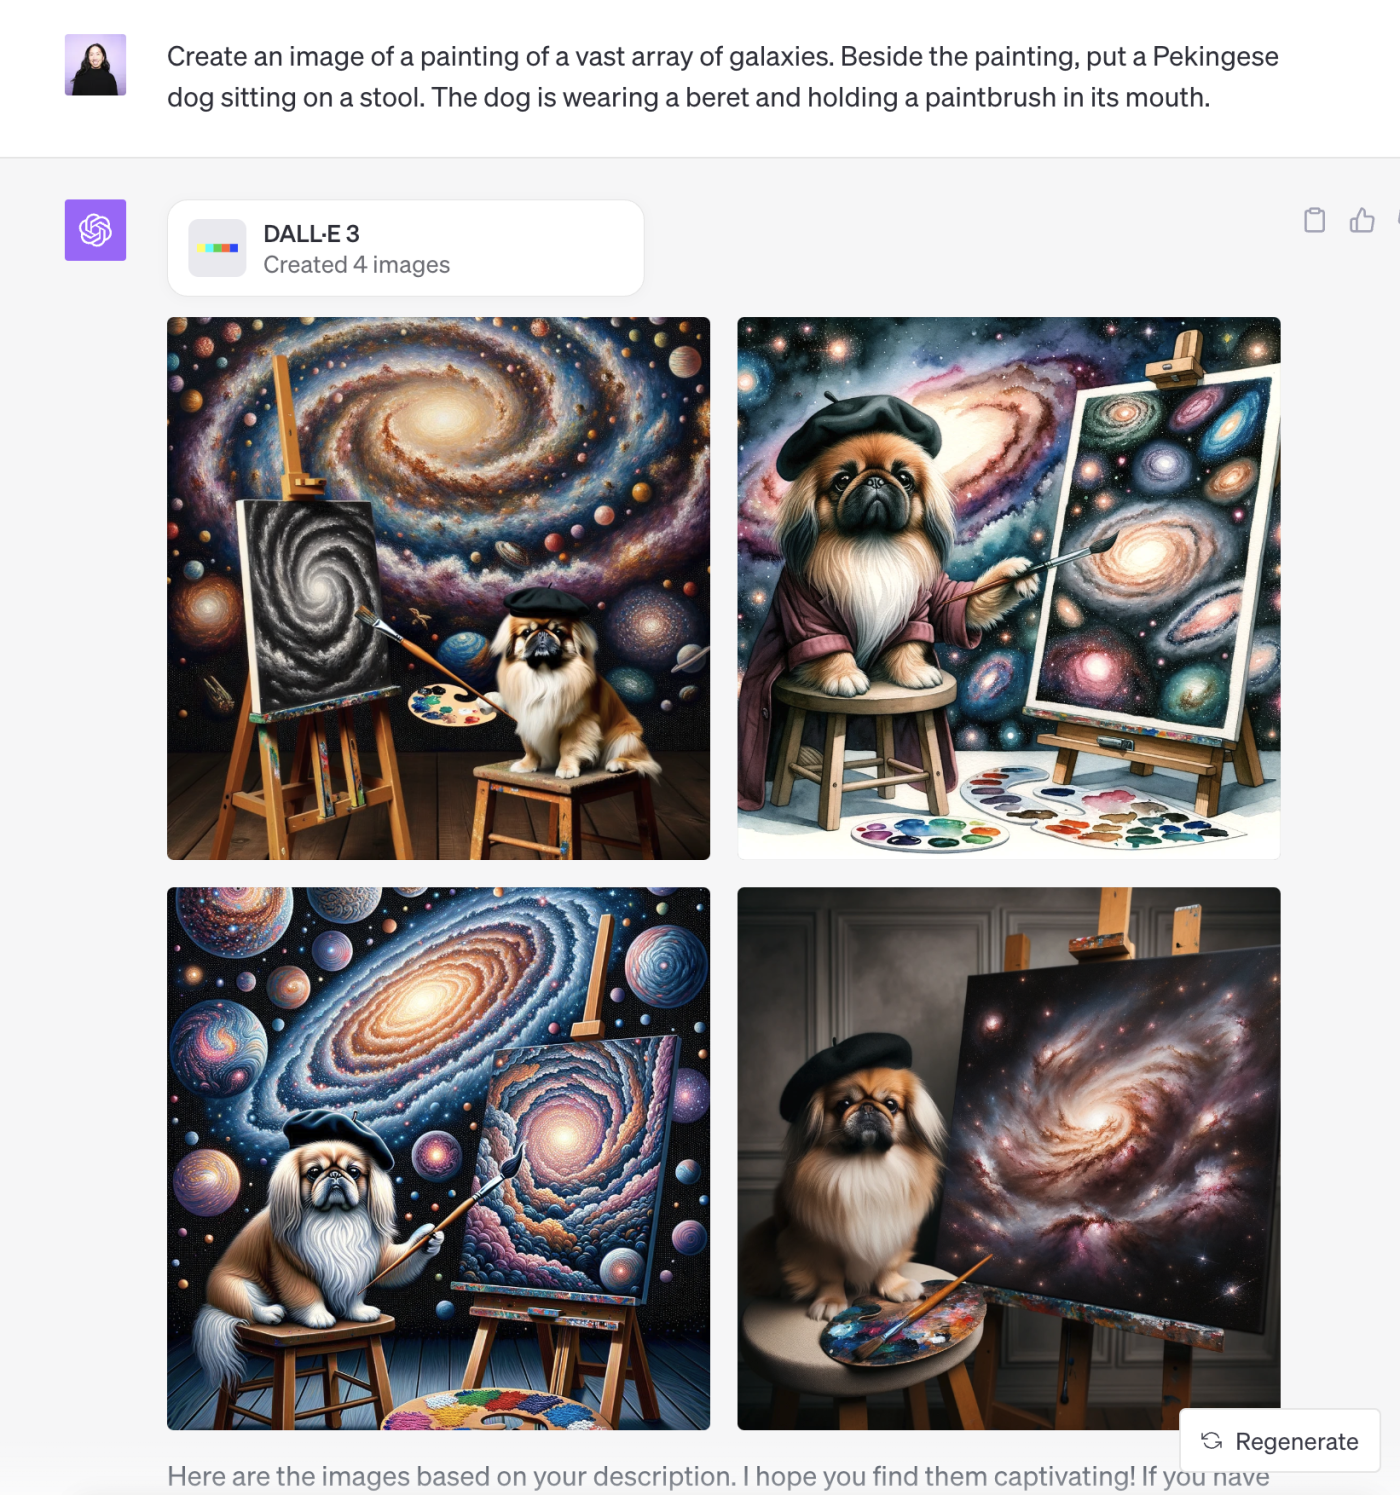 ChatGPT conversation with four AI-generated images of a Pekingese dog wearing a beret, sitting on a stool beside a painting of galaxies.